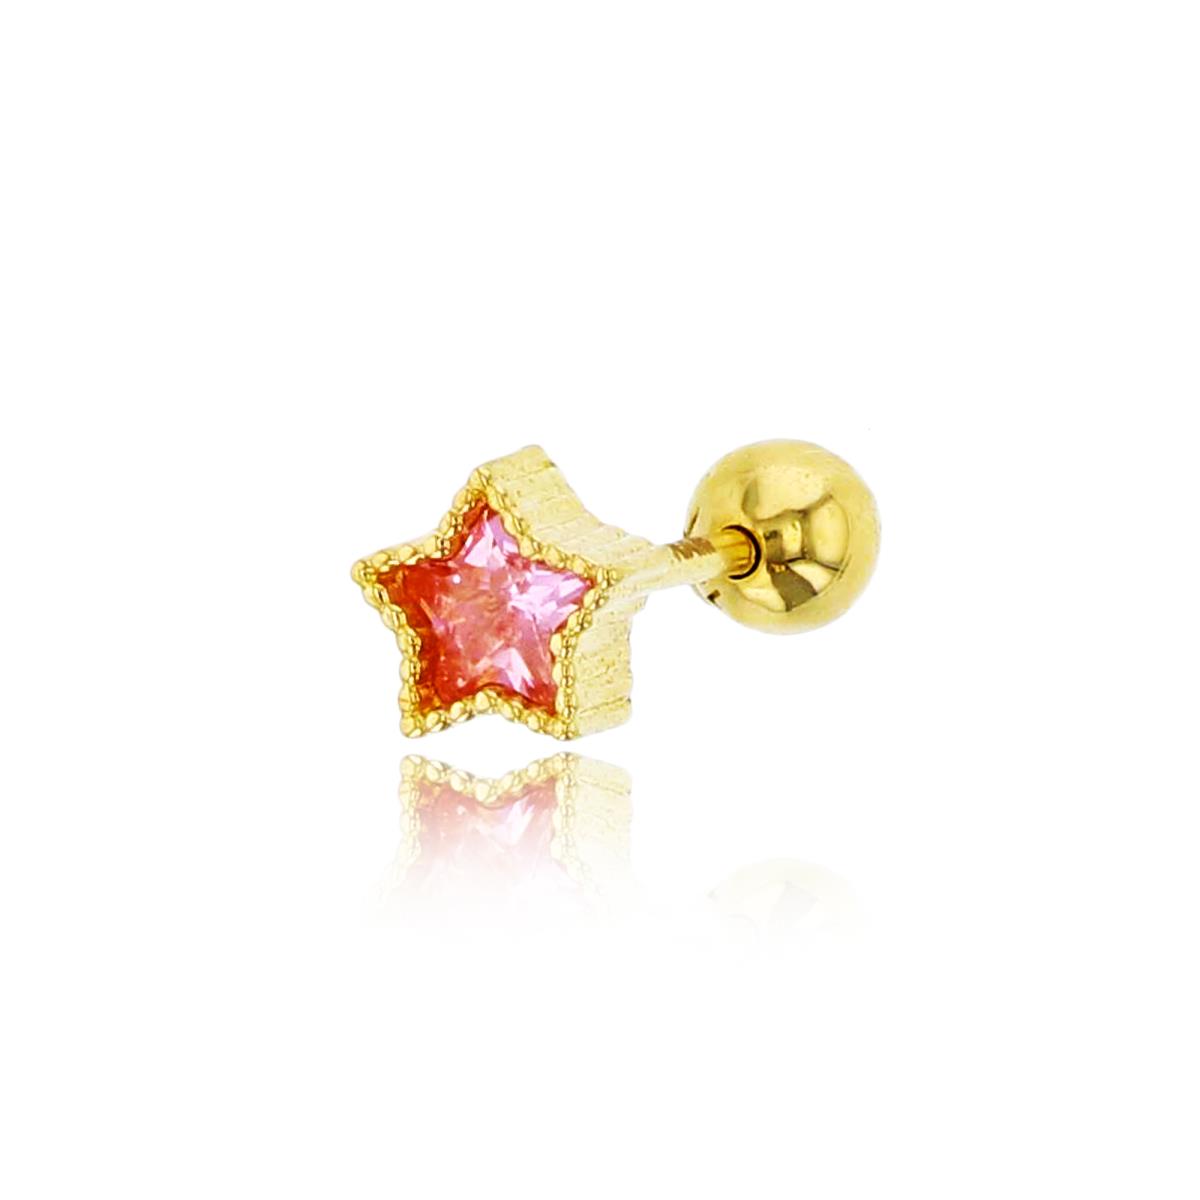 14K Yellow Gold 3mm Pink Star Cut Milgrain Ear/Nose Stud with Ball Screw-Back